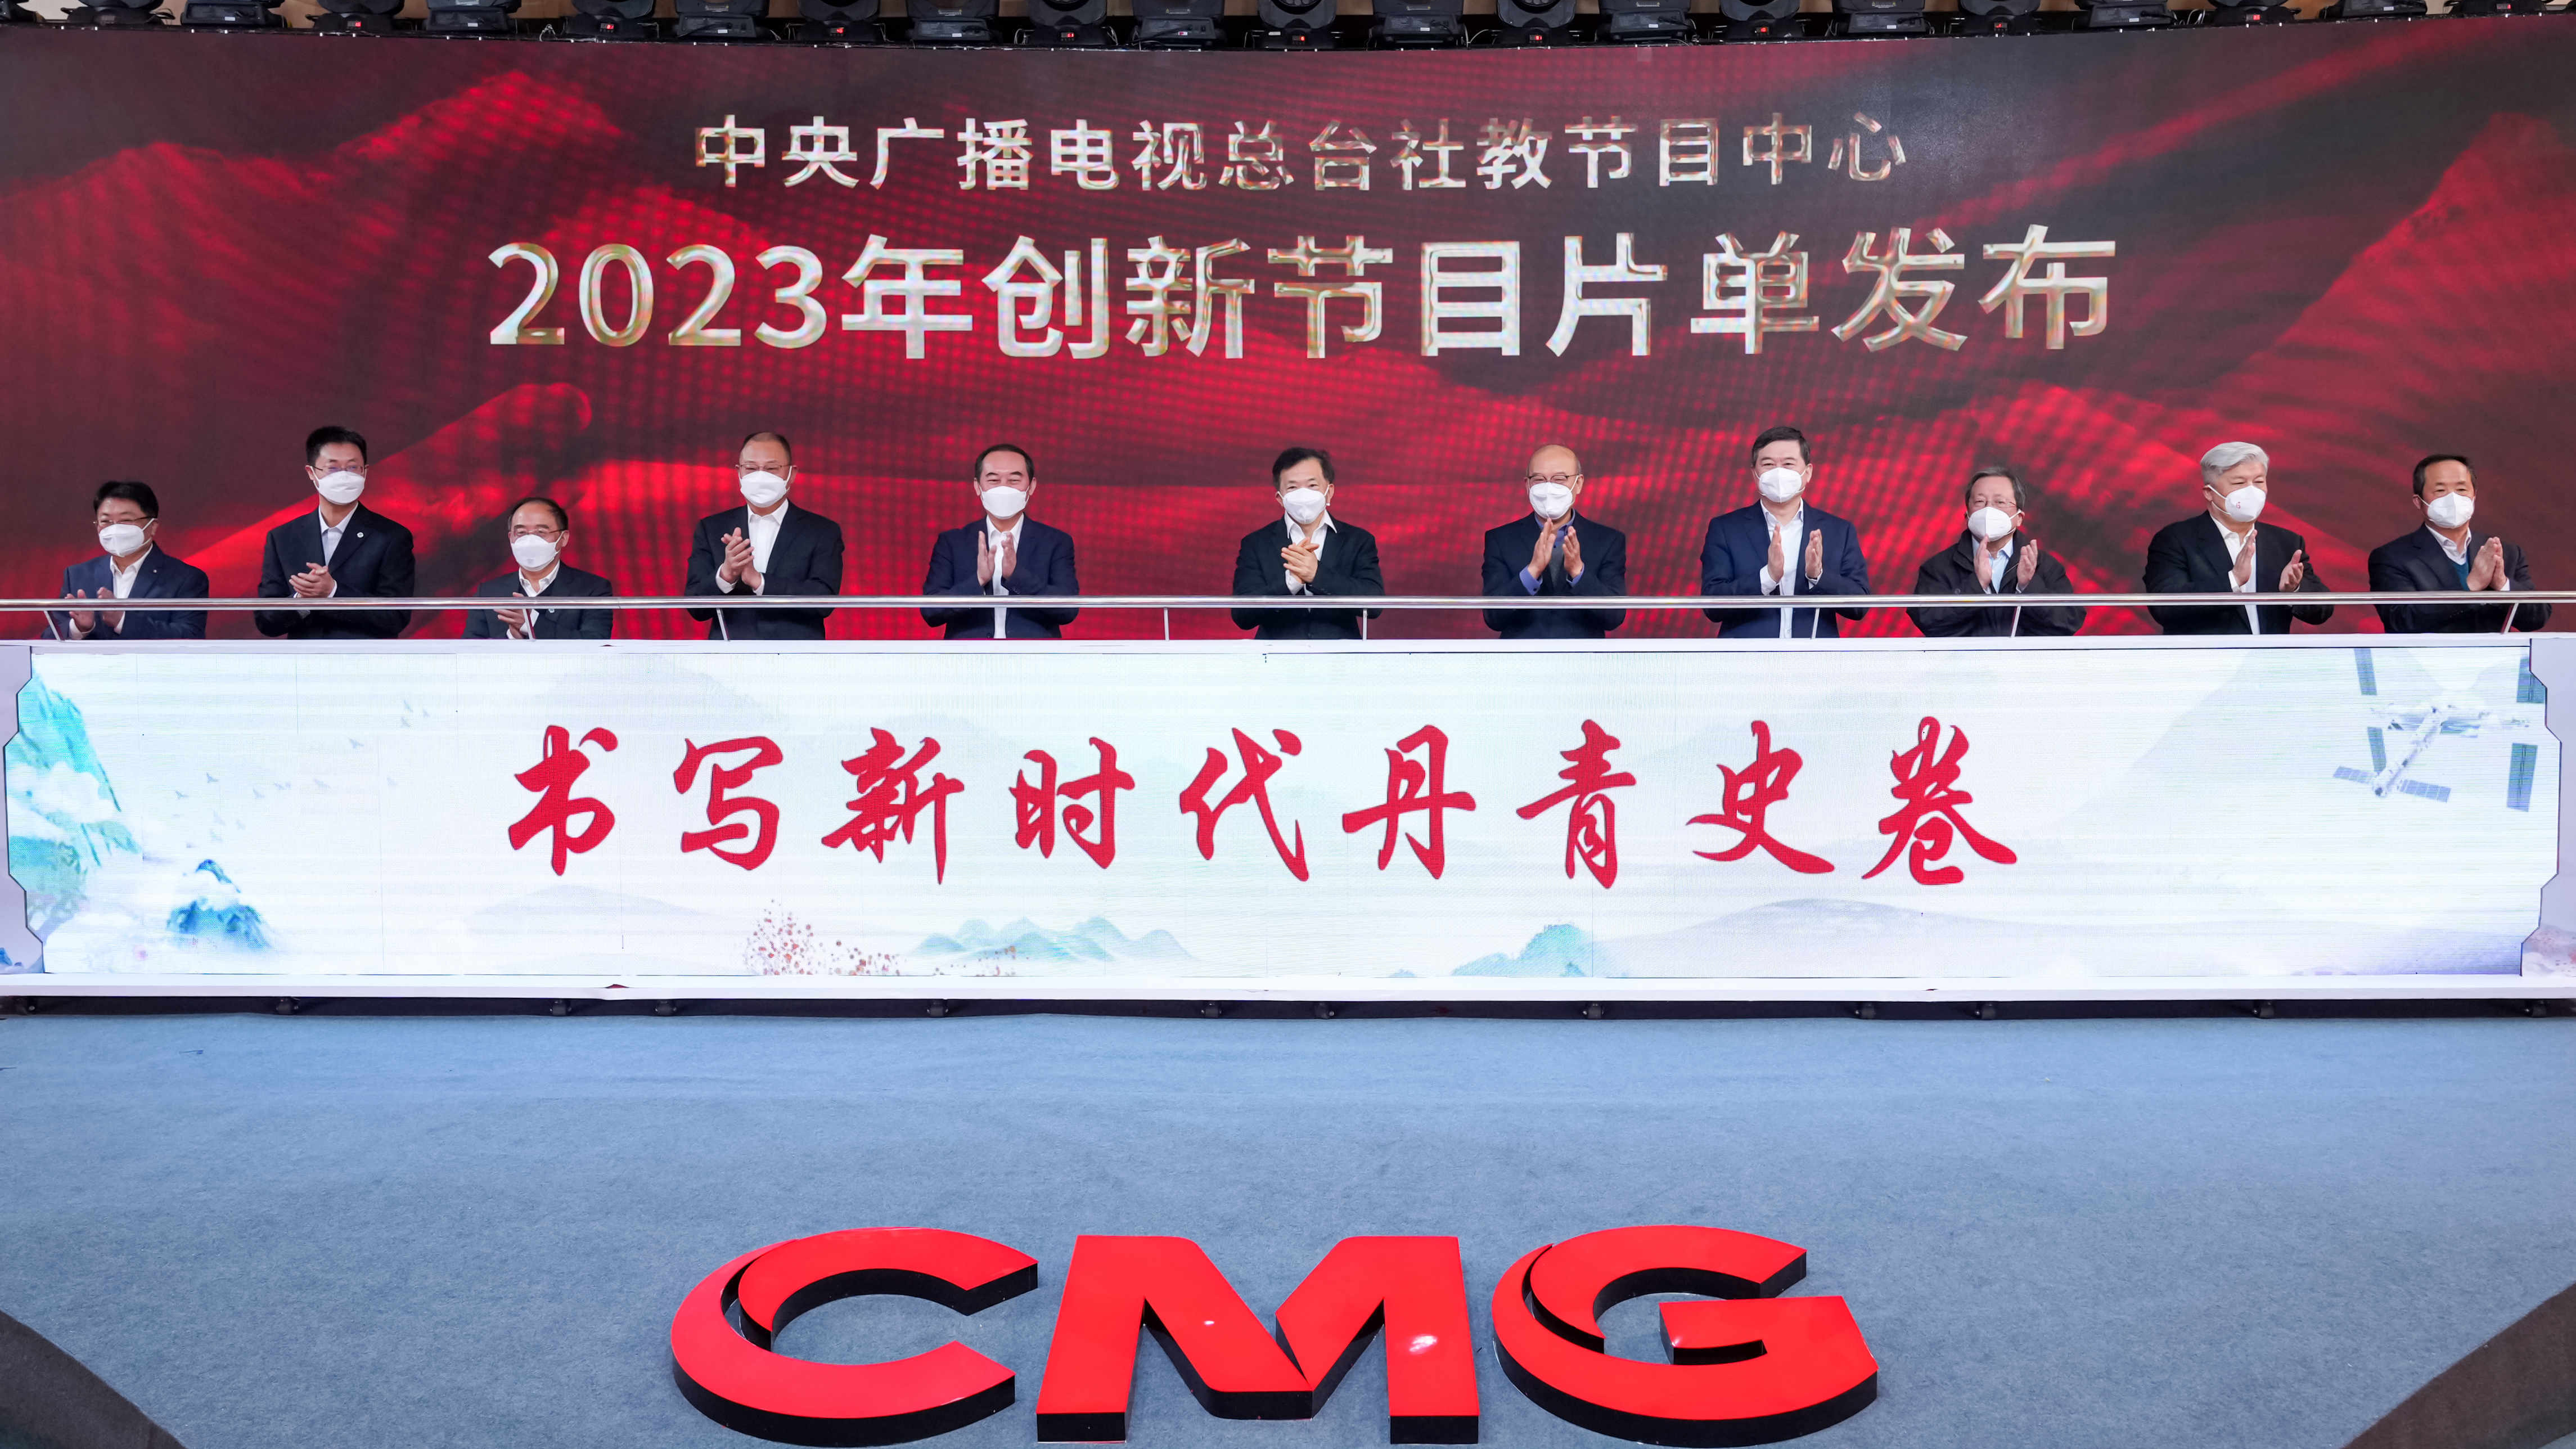 The Society and Education Program Center of China Media Group held a press conference on the 2023 innovative program list in Beijing, January 16, 2023. /CMG